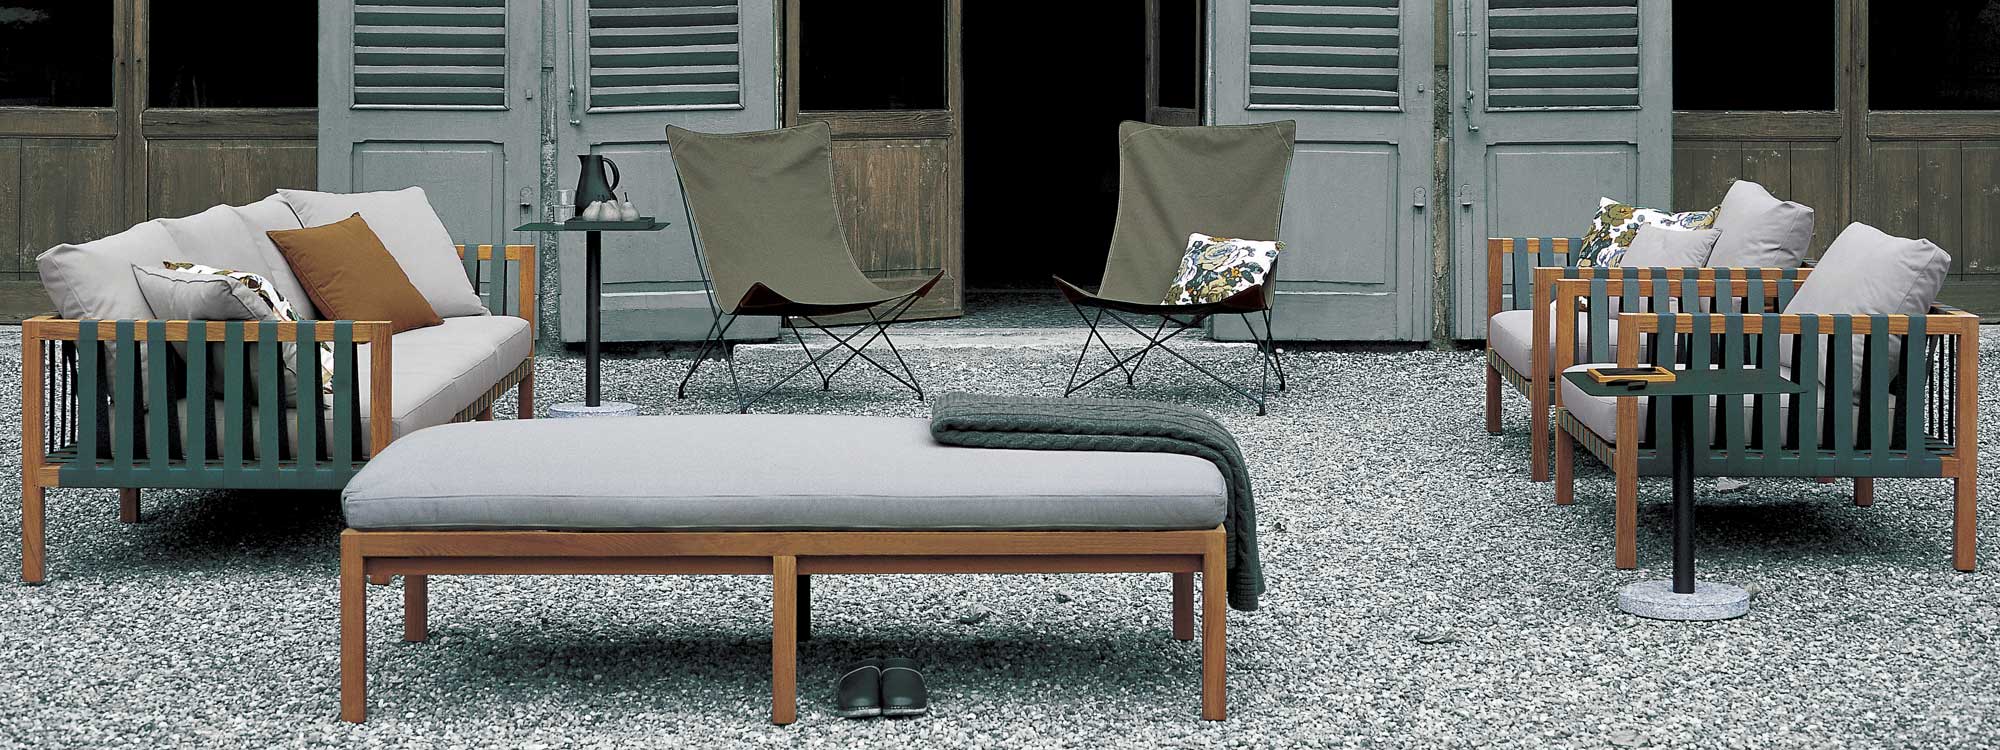 Image of RODA Mistral teak sofa and lounge chairs with teal webbing and light-grey cushions, next to Lawrence butterfly chairs, shown on gravel terrace